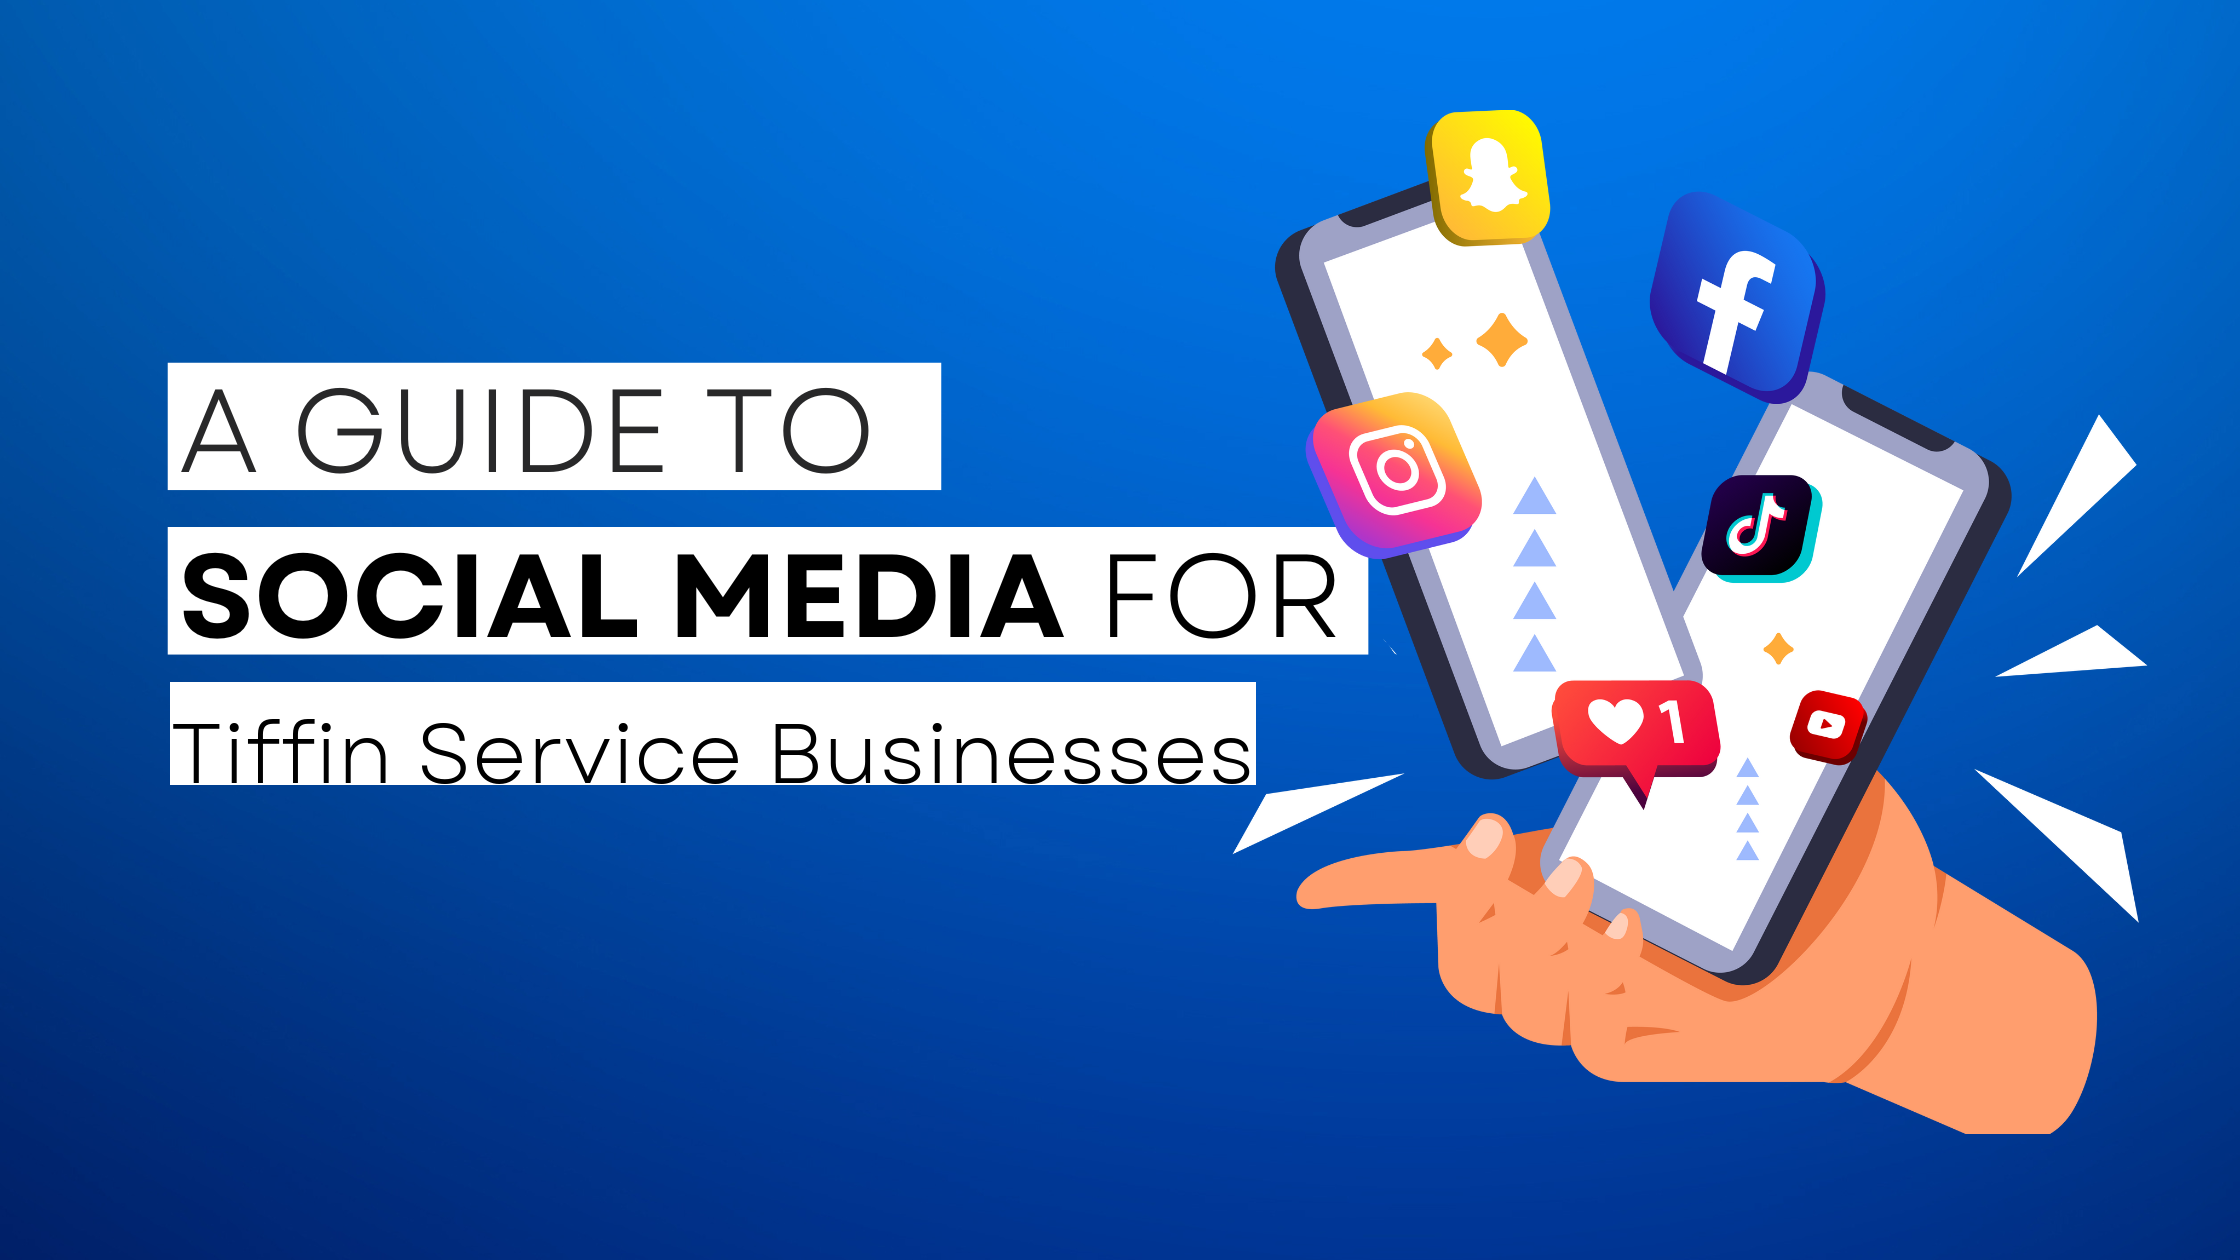 How to start Tiffin Service on social media